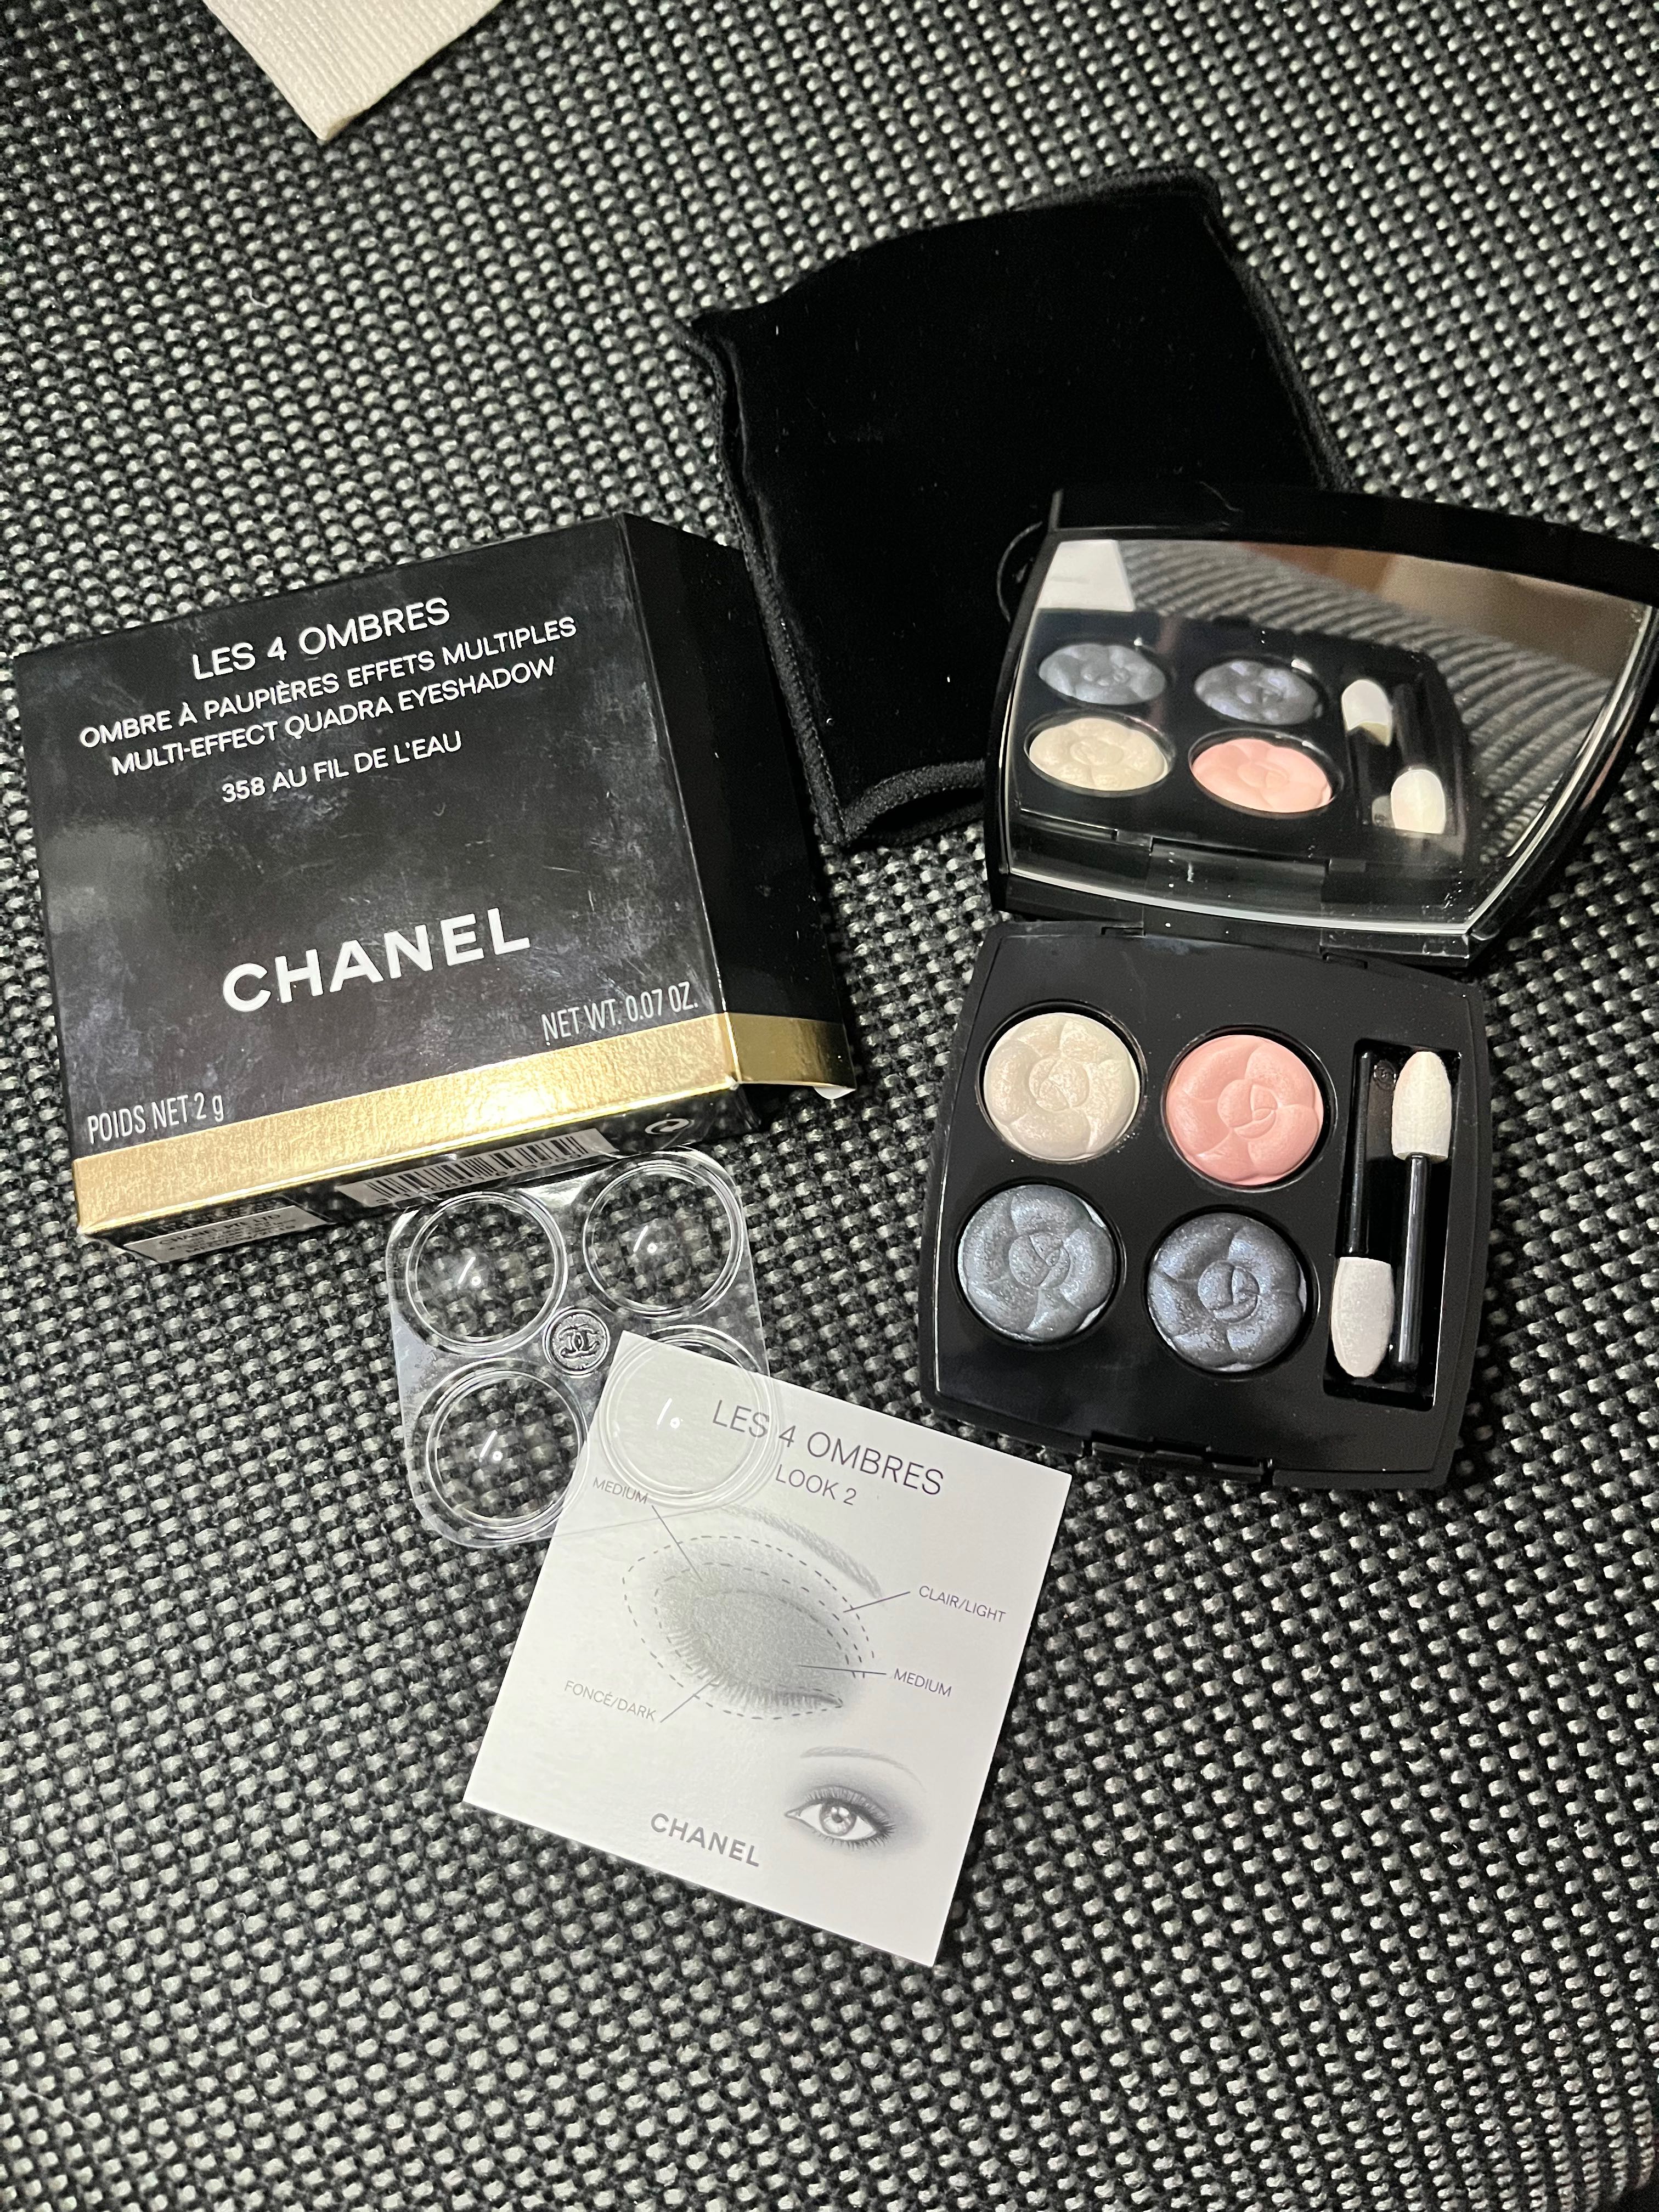 Chanel limited edition eye shadow eyeshadow Les 4 Ombres 358